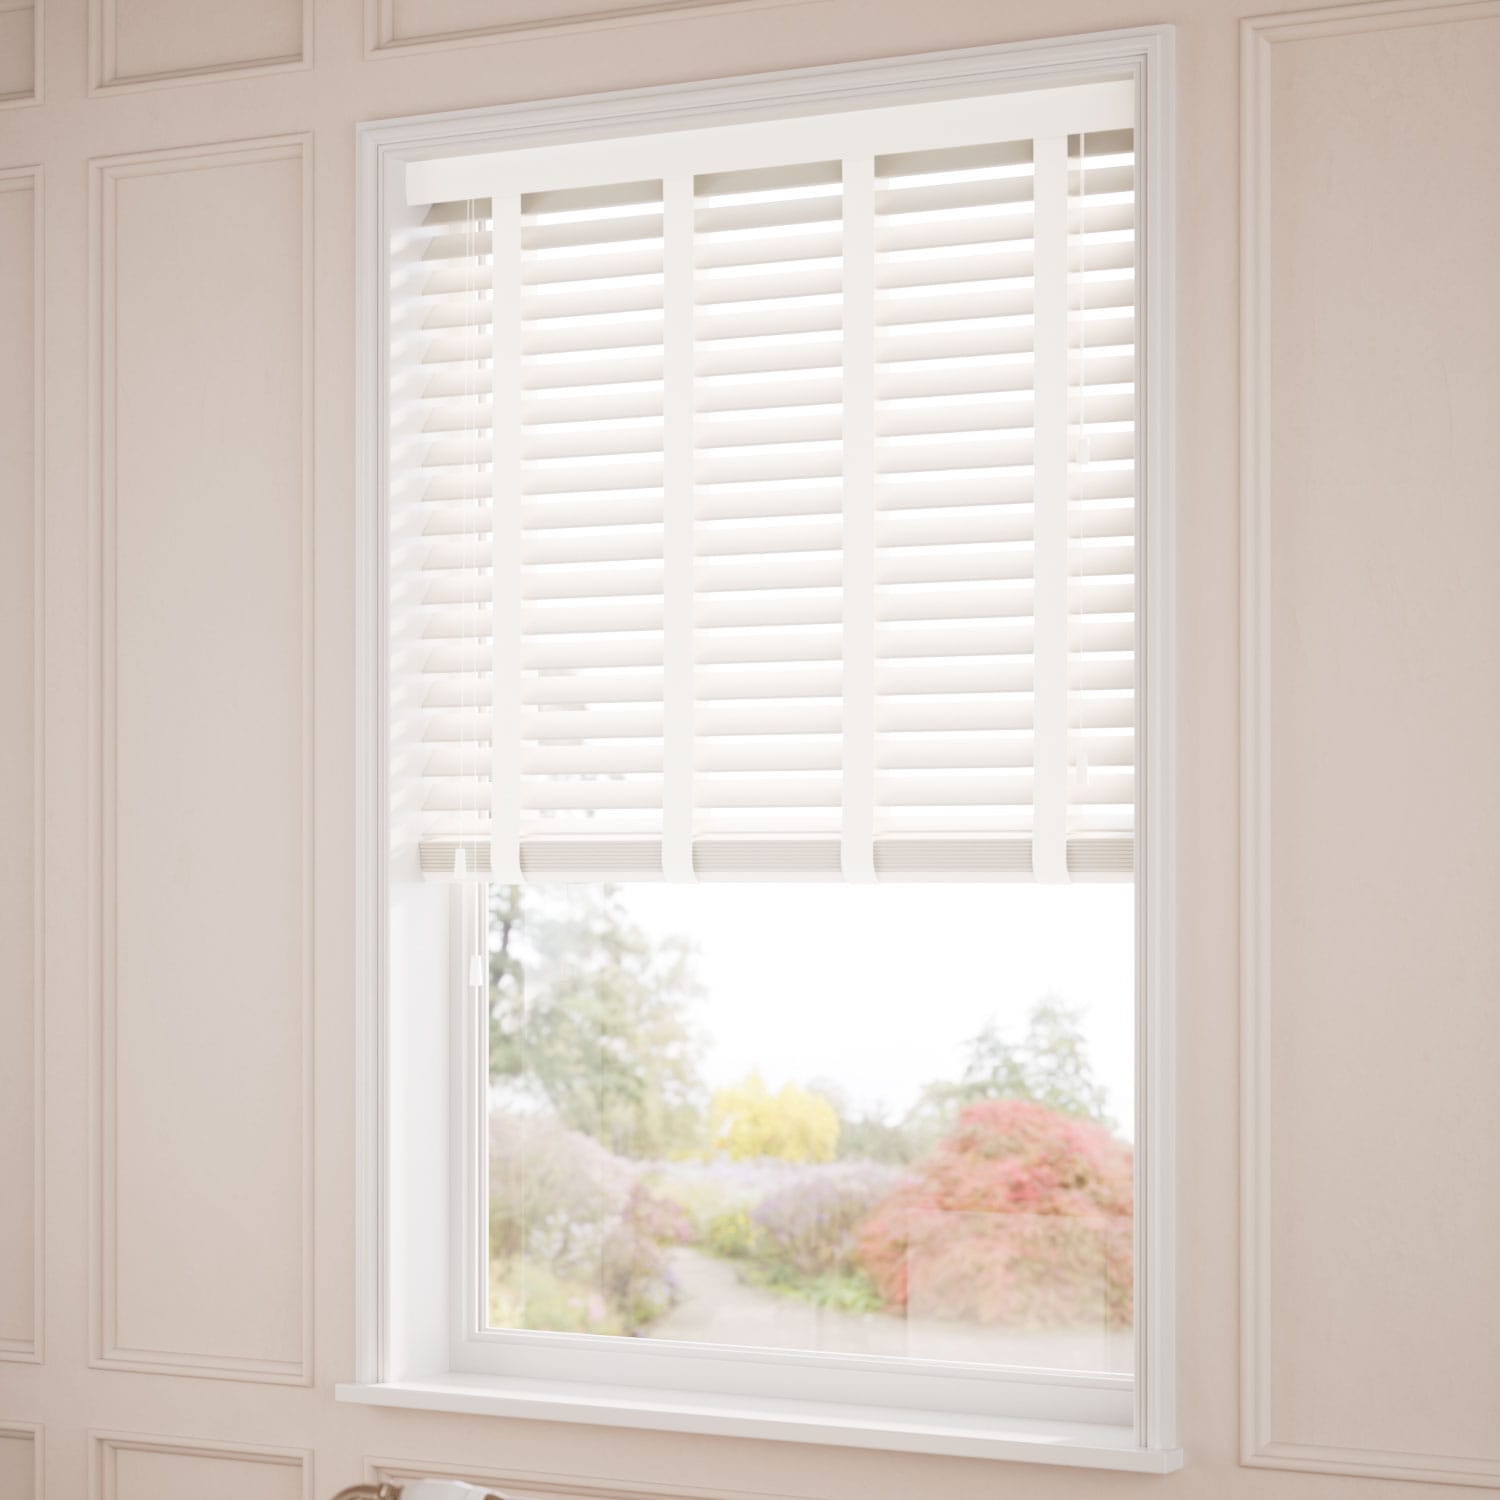 White Wooden Blinds With Tapes Made To, Wooden Faux Blinds With Tapes